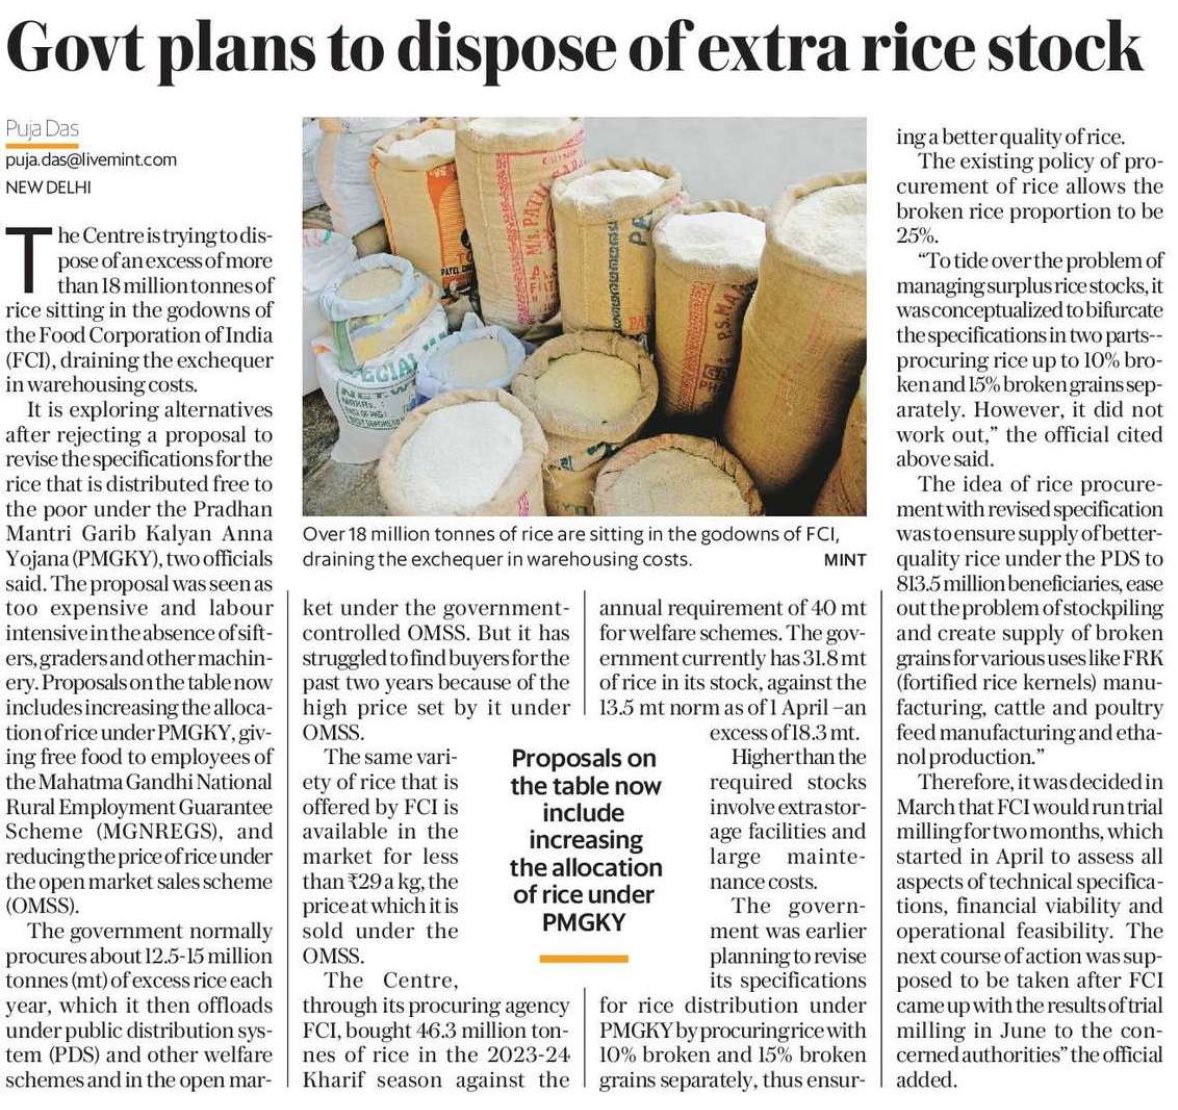 The central govt hoarded rice, refusing to provide for Karnataka's Annabhagya. Now, with 18 million tonnes sitting idle, they plan to dispose of it, draining taxpayers' money. Priorities seem misplaced! #Annabhagya #RiceWaste #TaxpayerMoney